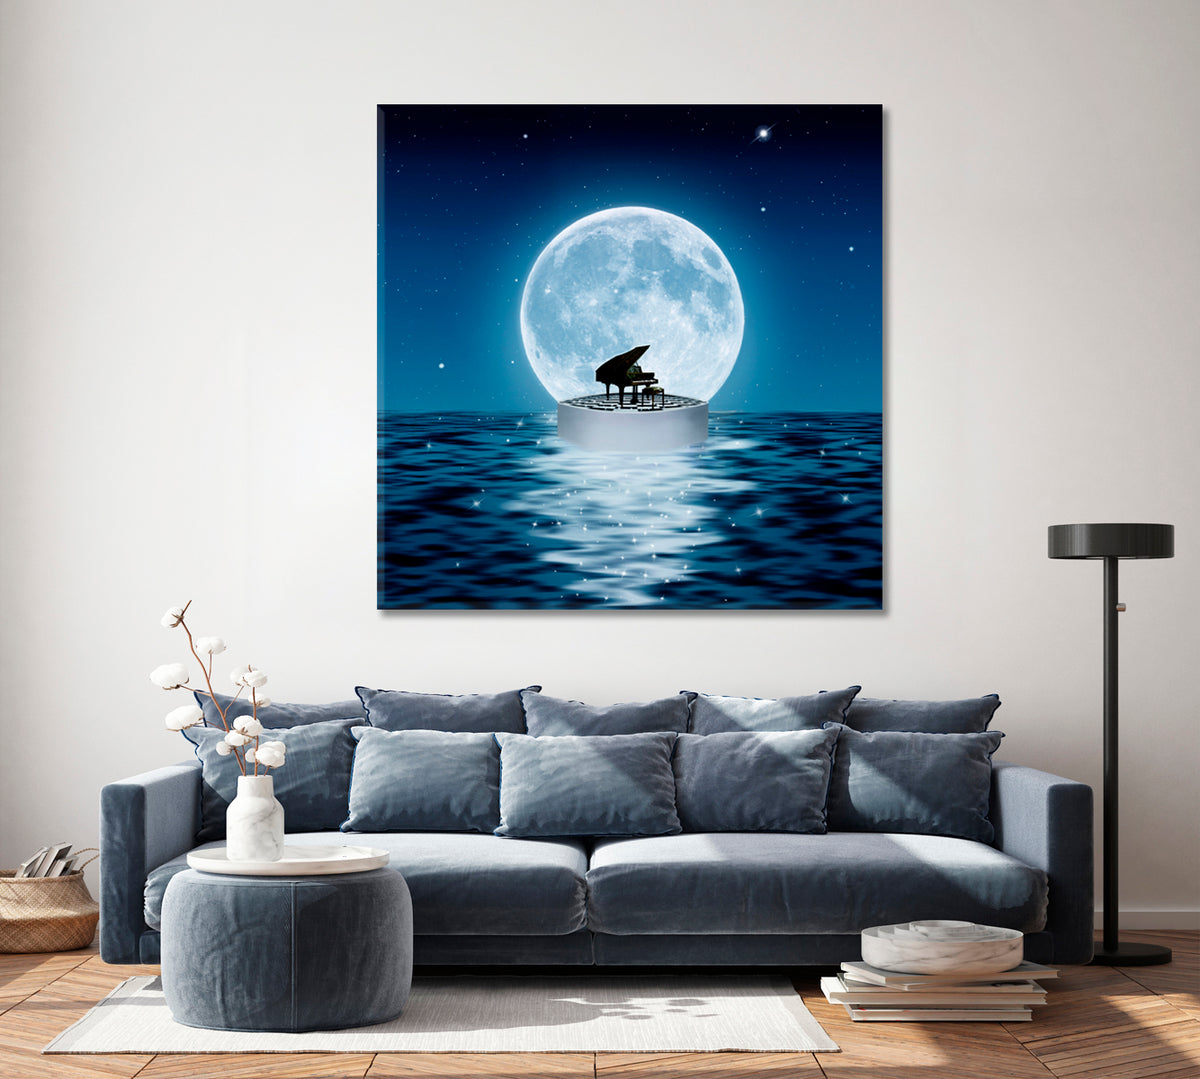 OCEAN AT NIGHT Piano Floating Surreal Fantasy Large Art Print Décor Artesty 1 Panel 12"x12" 